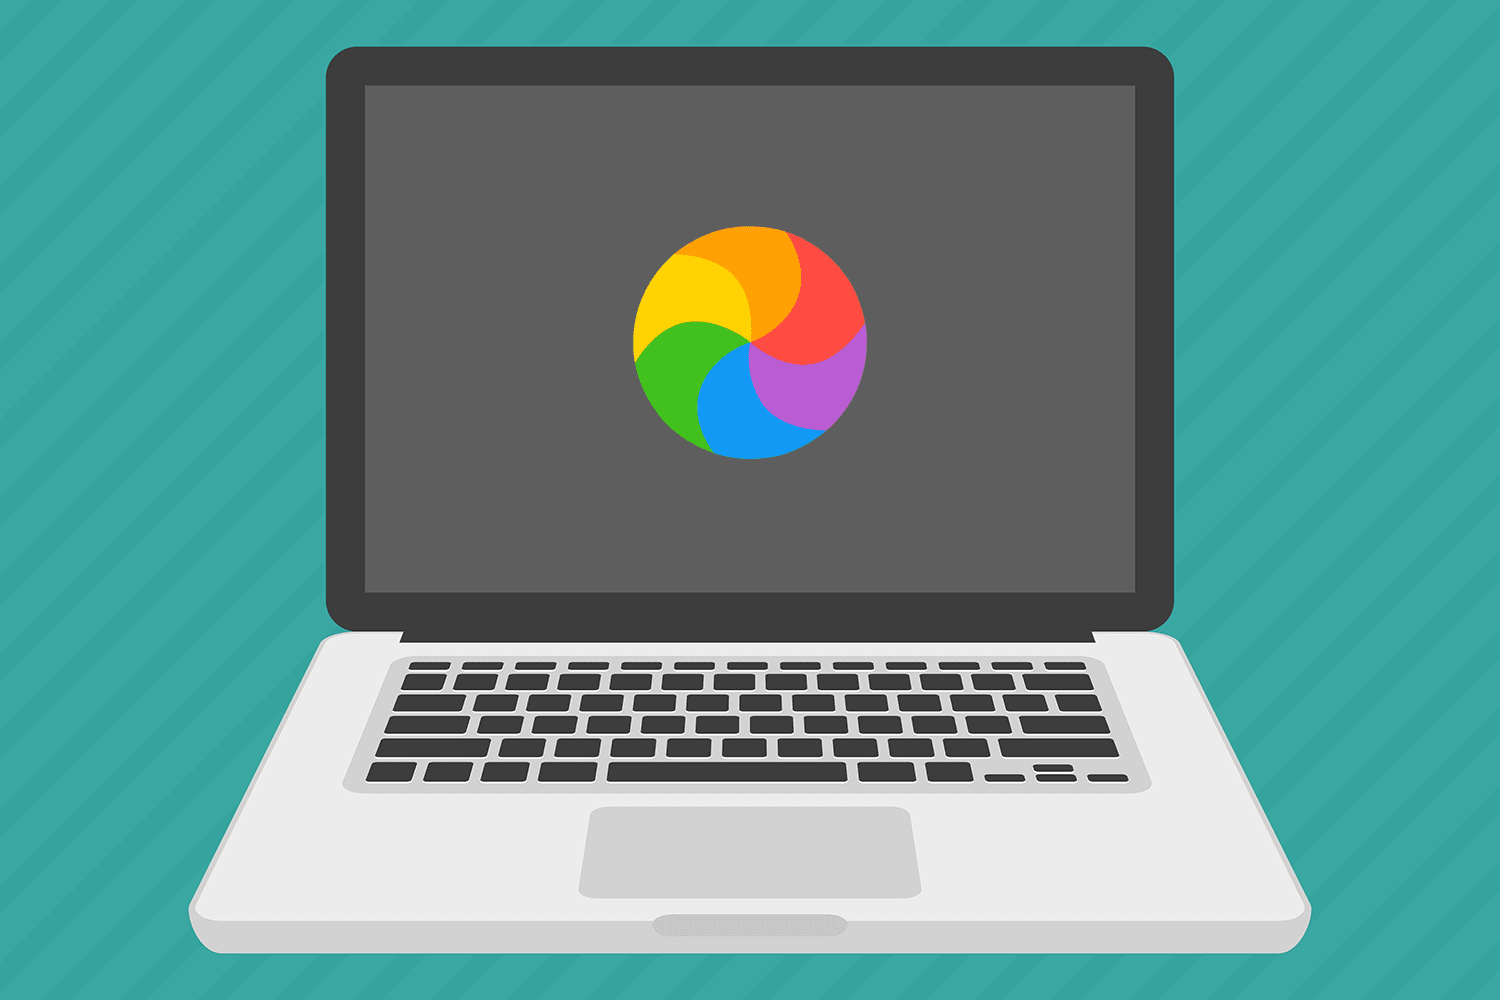 Spinning-Color-Wheel-Mean-on-Mac?